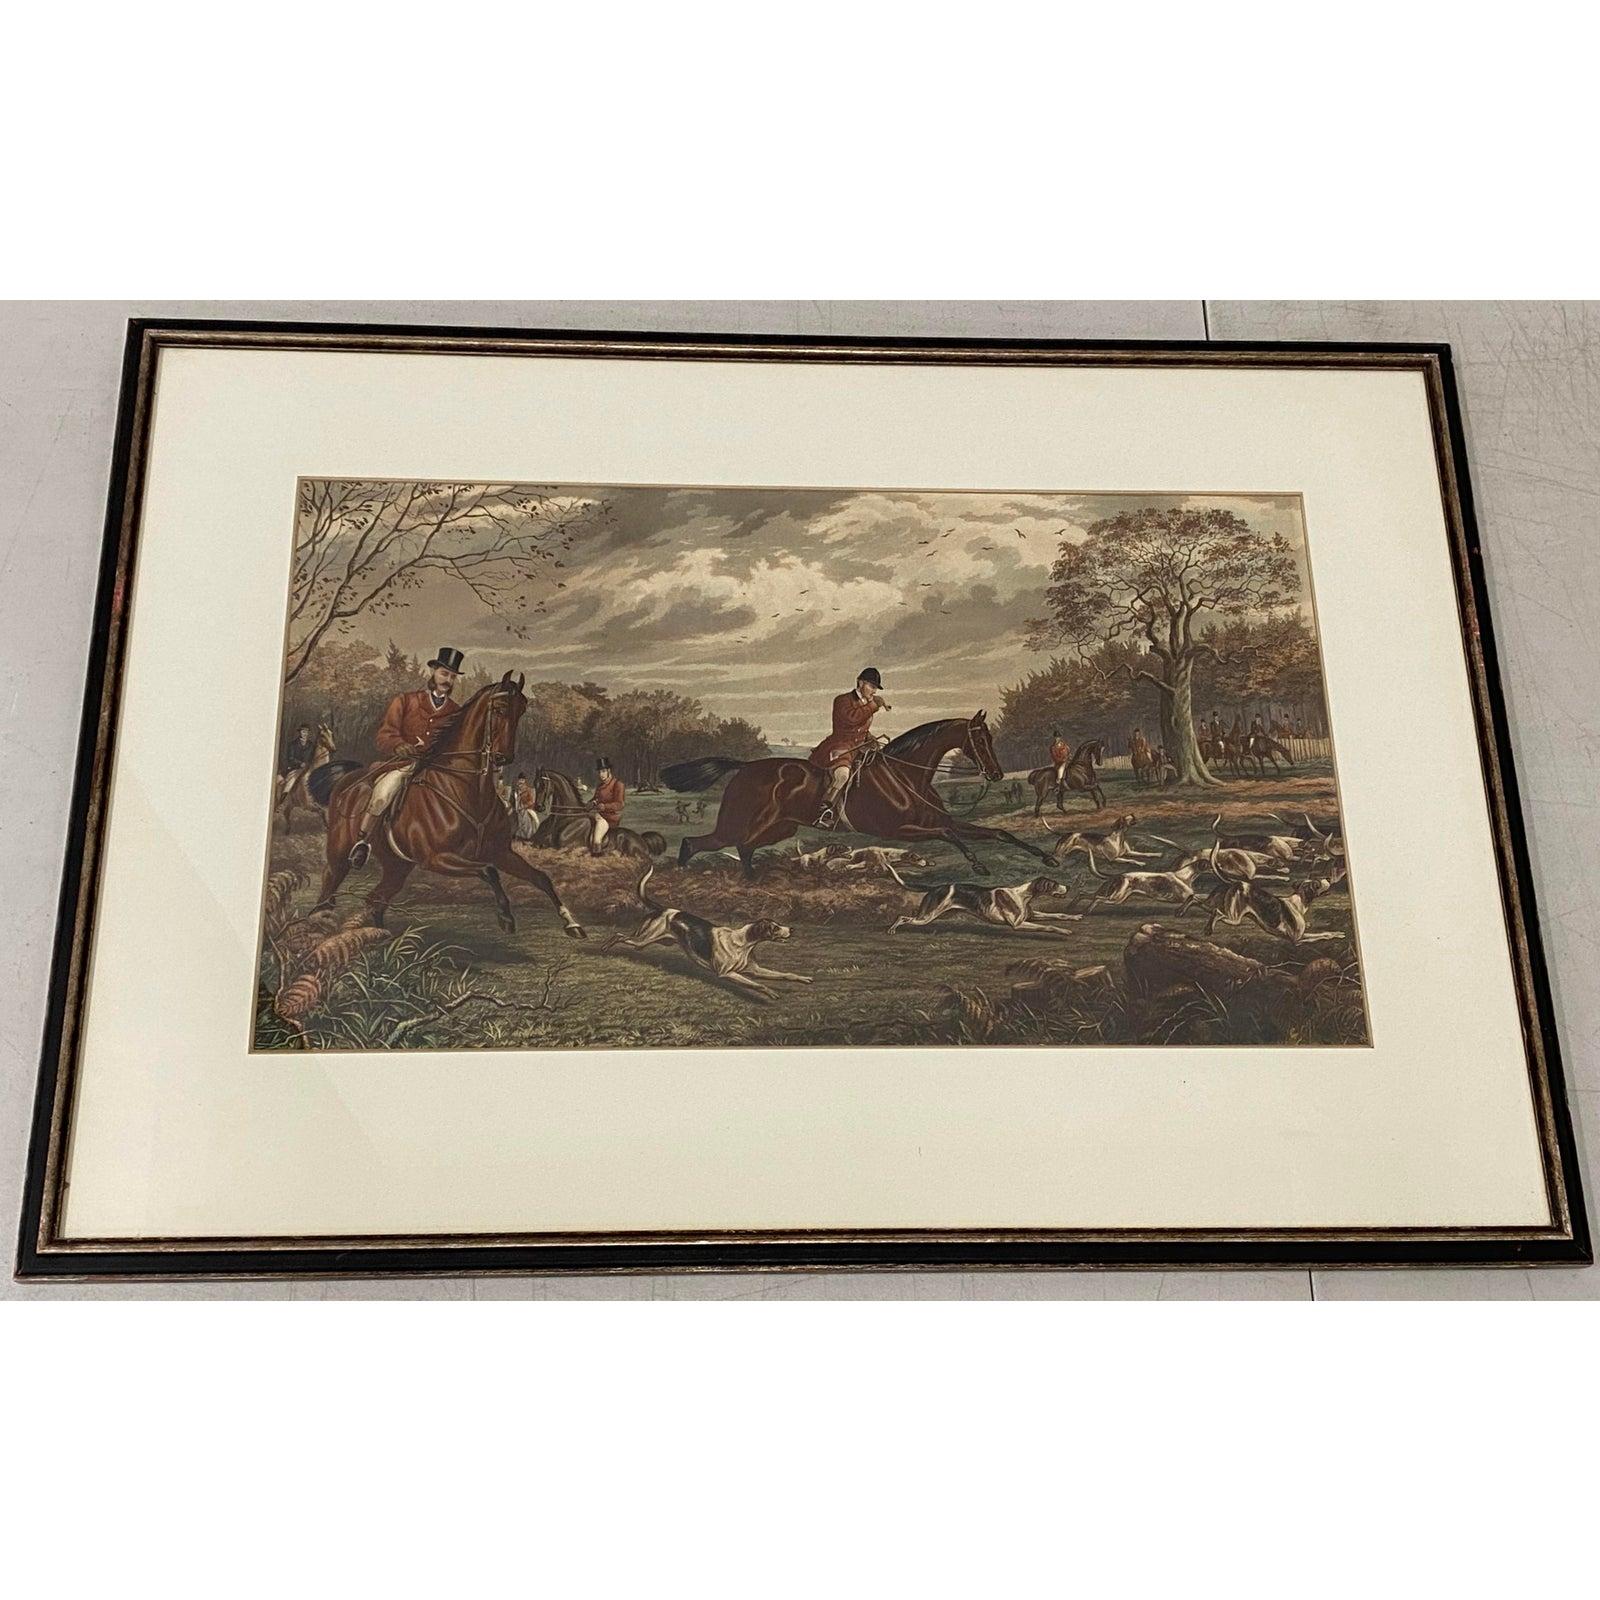 Pair of 19th century hand colored equestrian fox hunt engravings

Each hand colored print measures 24